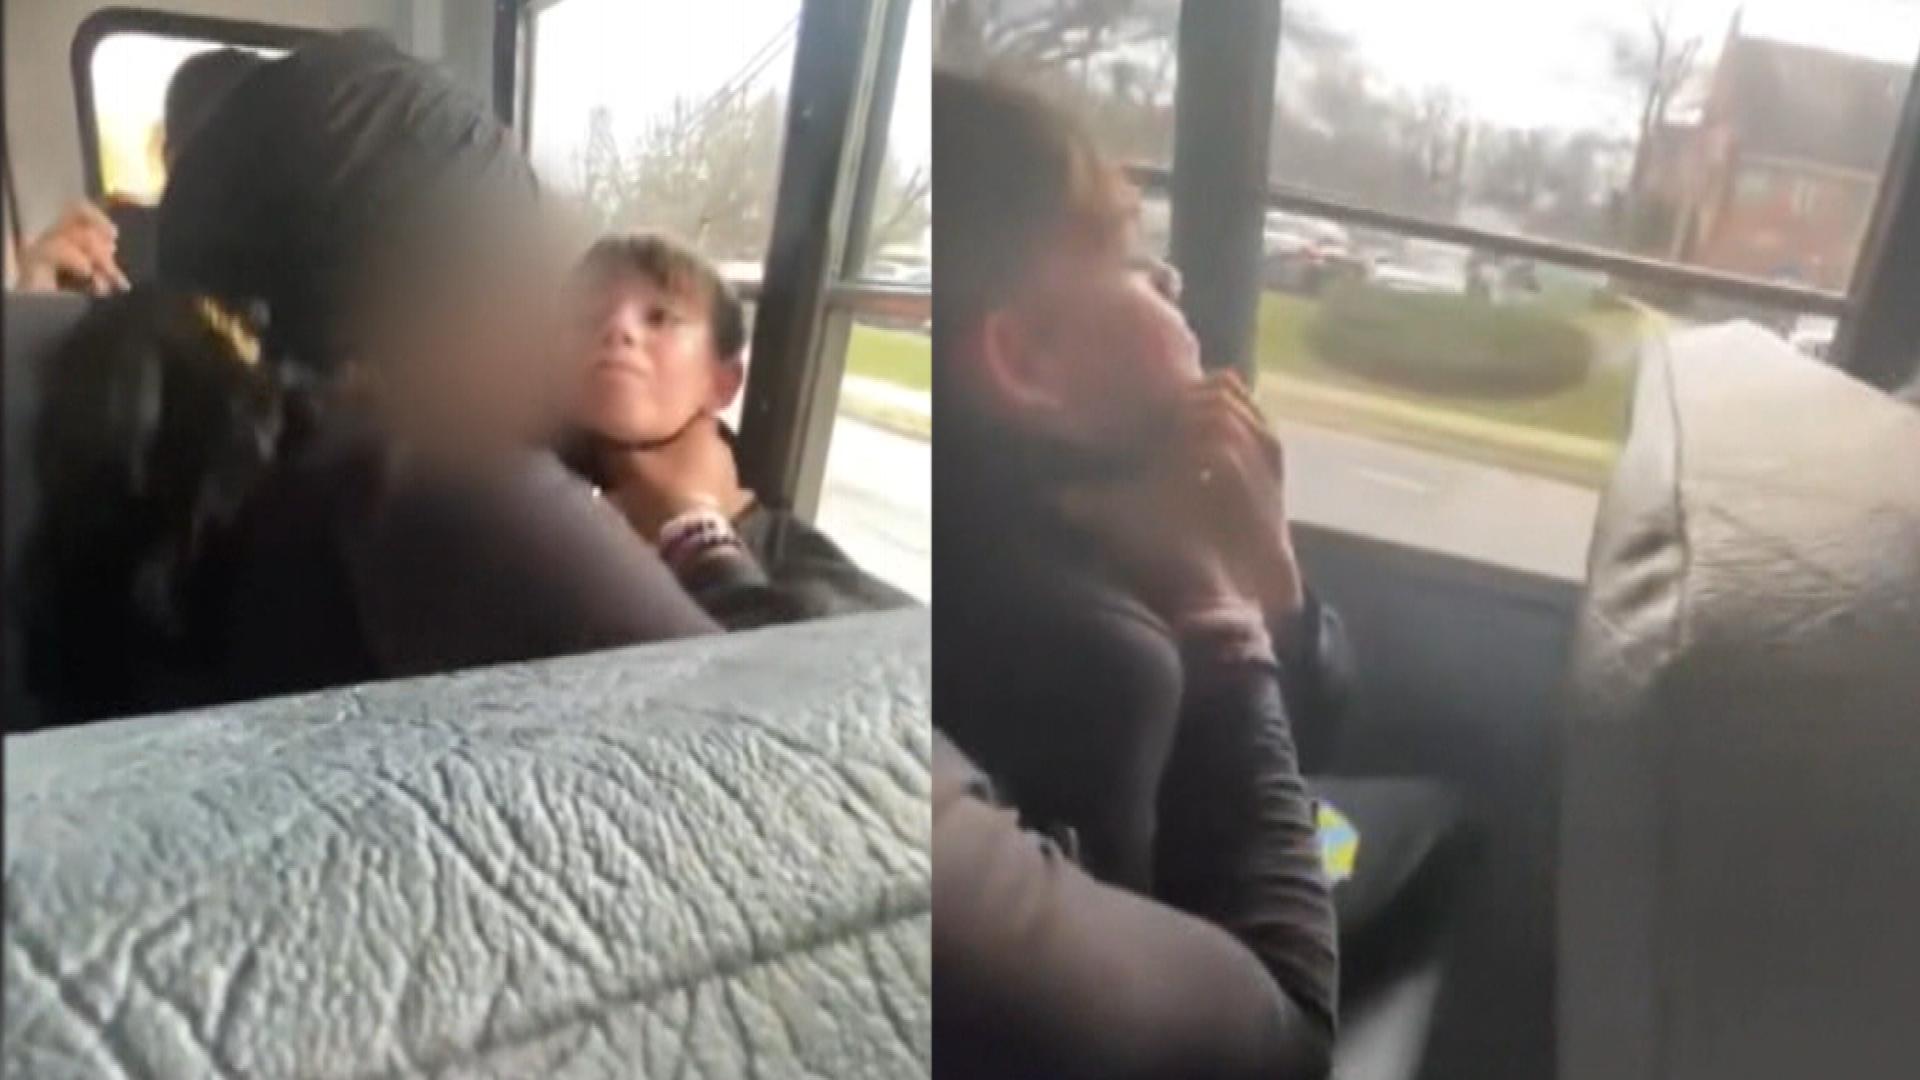 School Bus Teen - 12-Year-Old Boy Choked by Older Student on School Bus | Inside Edition